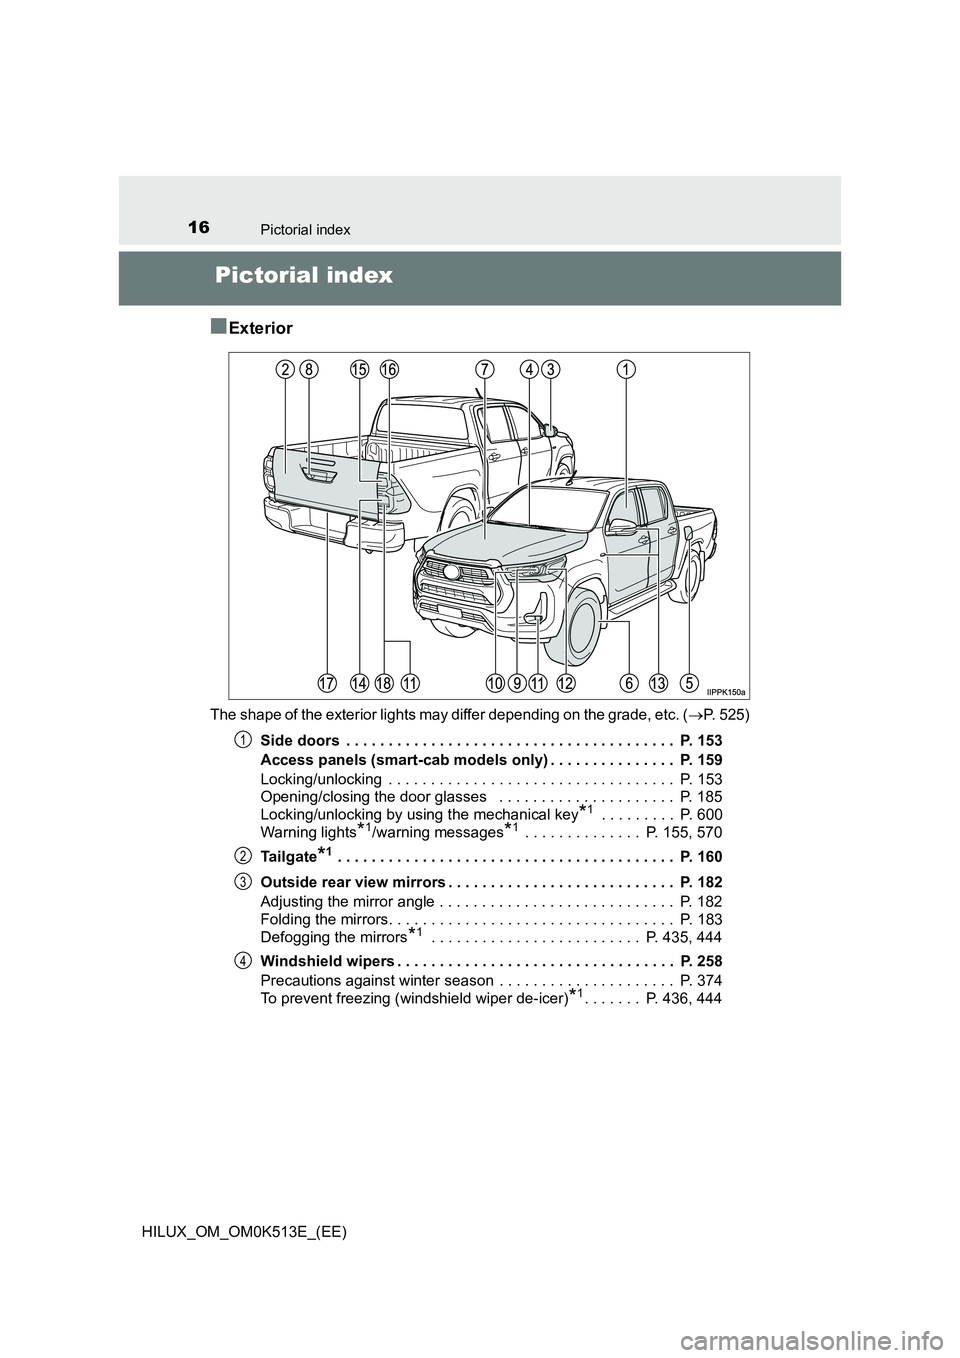 TOYOTA HILUX 2022  Owners Manual 16Pictorial index
HILUX_OM_OM0K513E_(EE)
Pictorial index 
�QExterior
The shape of the exterior lights may differ depending on the grade, etc. ( P. 525) 
Side doors  . . . . . . . . . . . . . . . . 